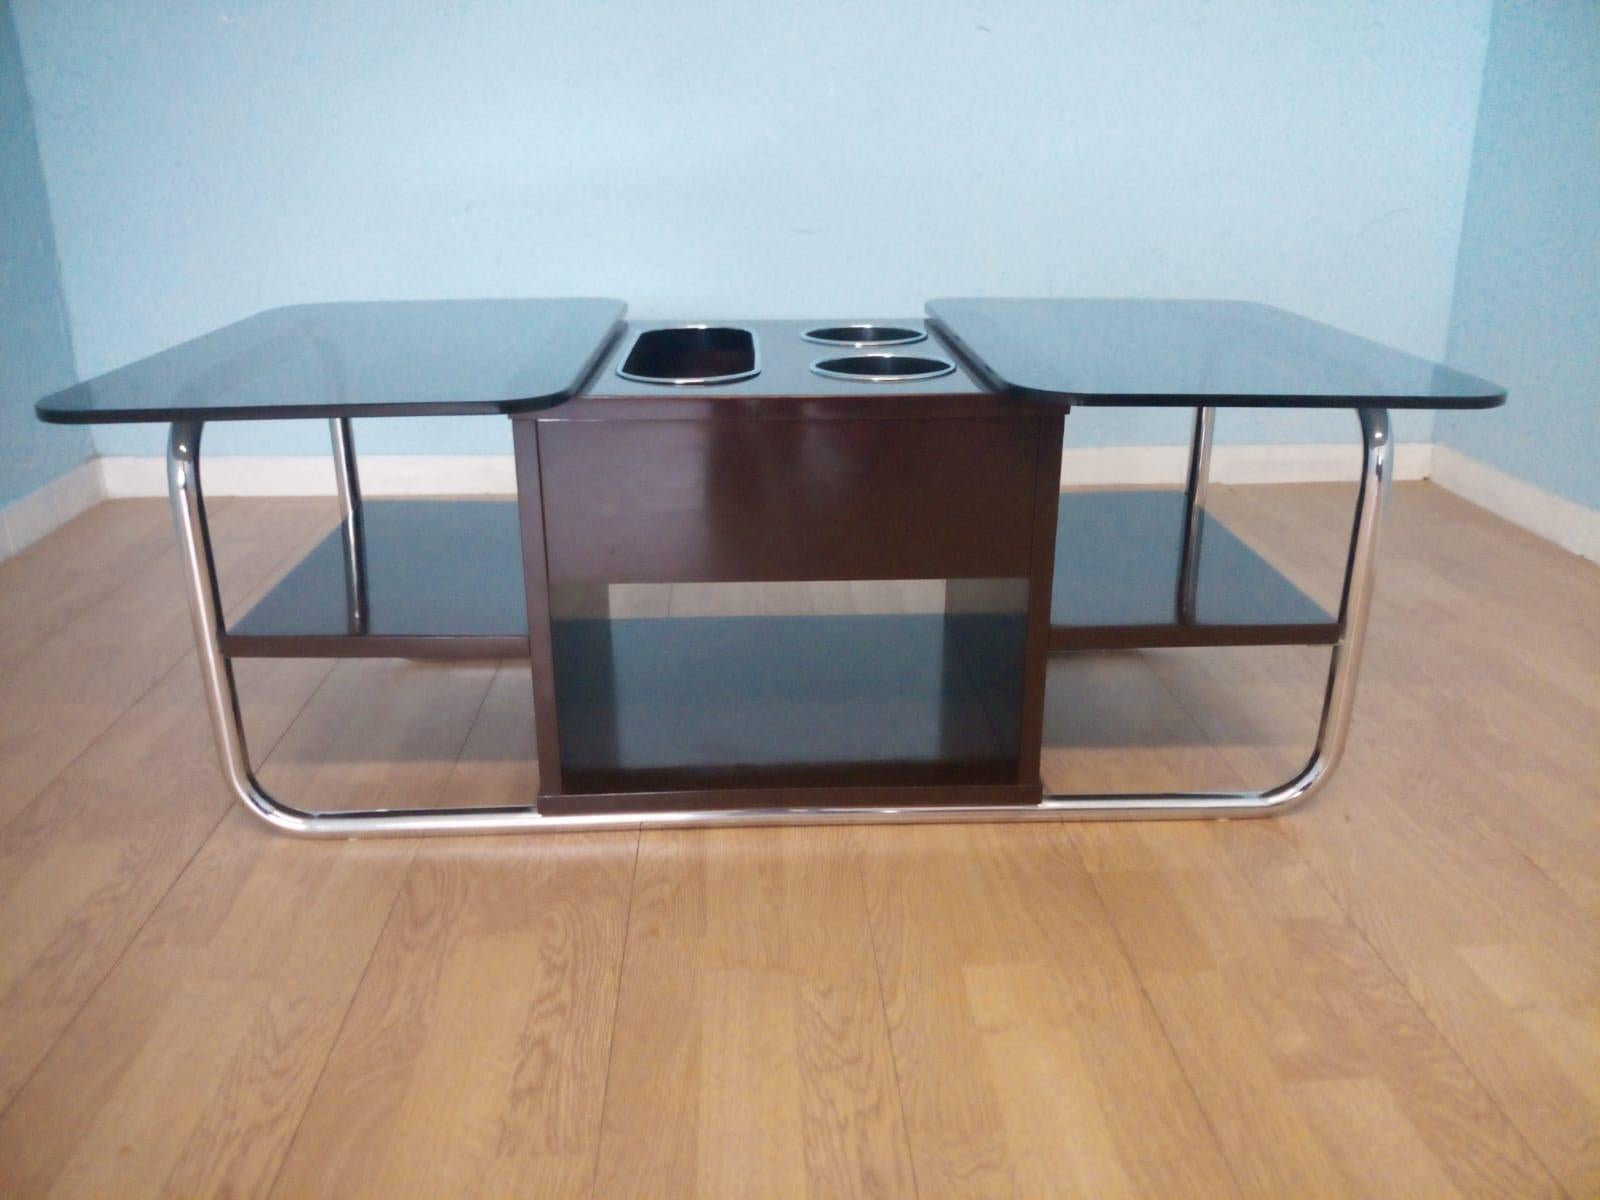 Aluminum Chrome & Smoked Glass Coffee Table, 1970s Bar Table Design Vintage Industrial For Sale